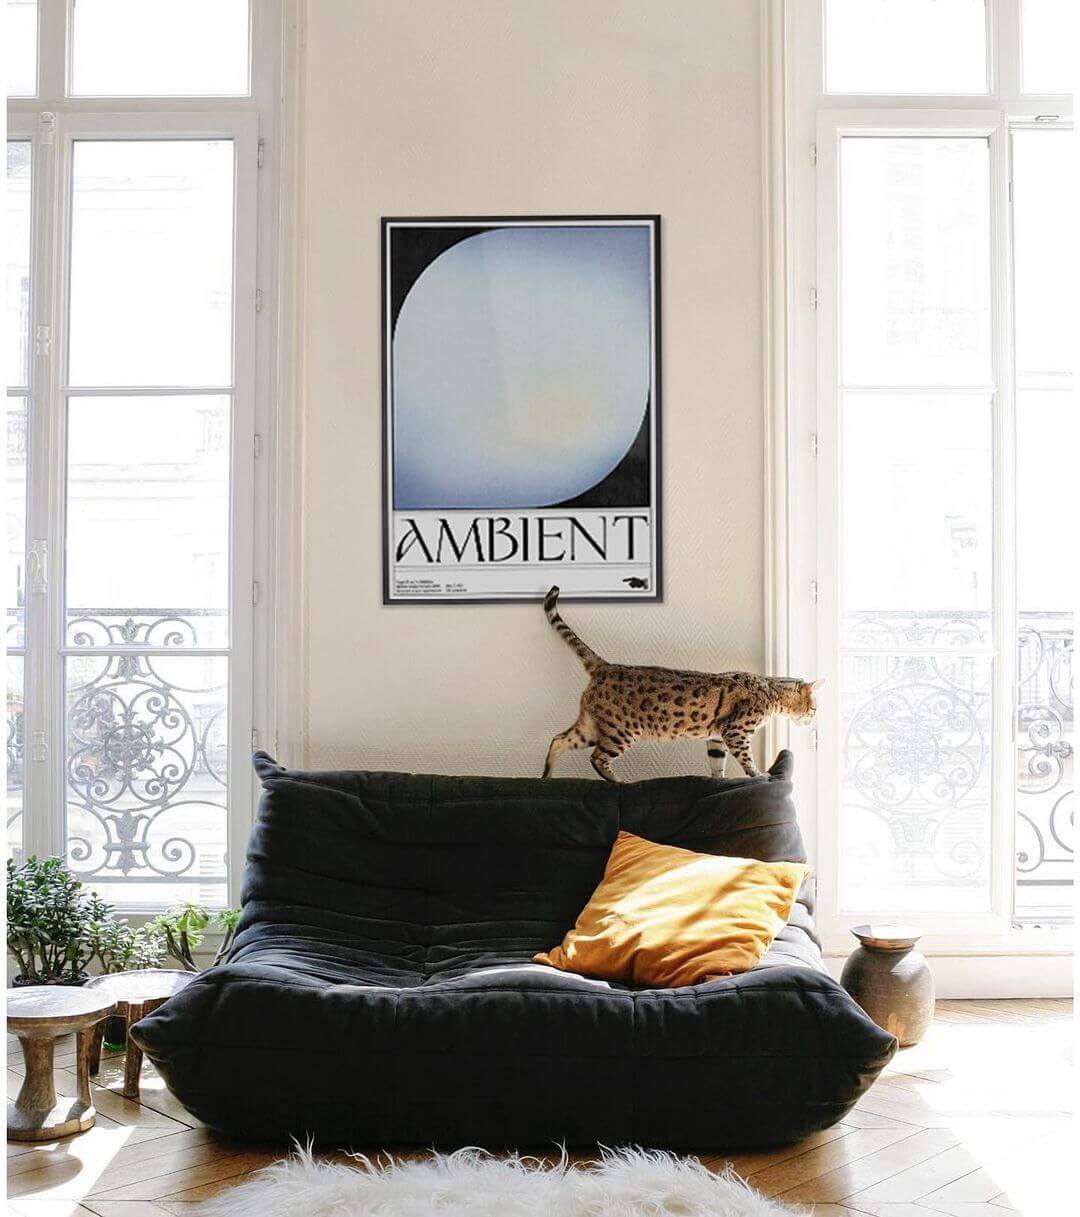 sitting room with a togo sofa, a cat walking on the top of it and a framed blue artwork hung on the wall above it